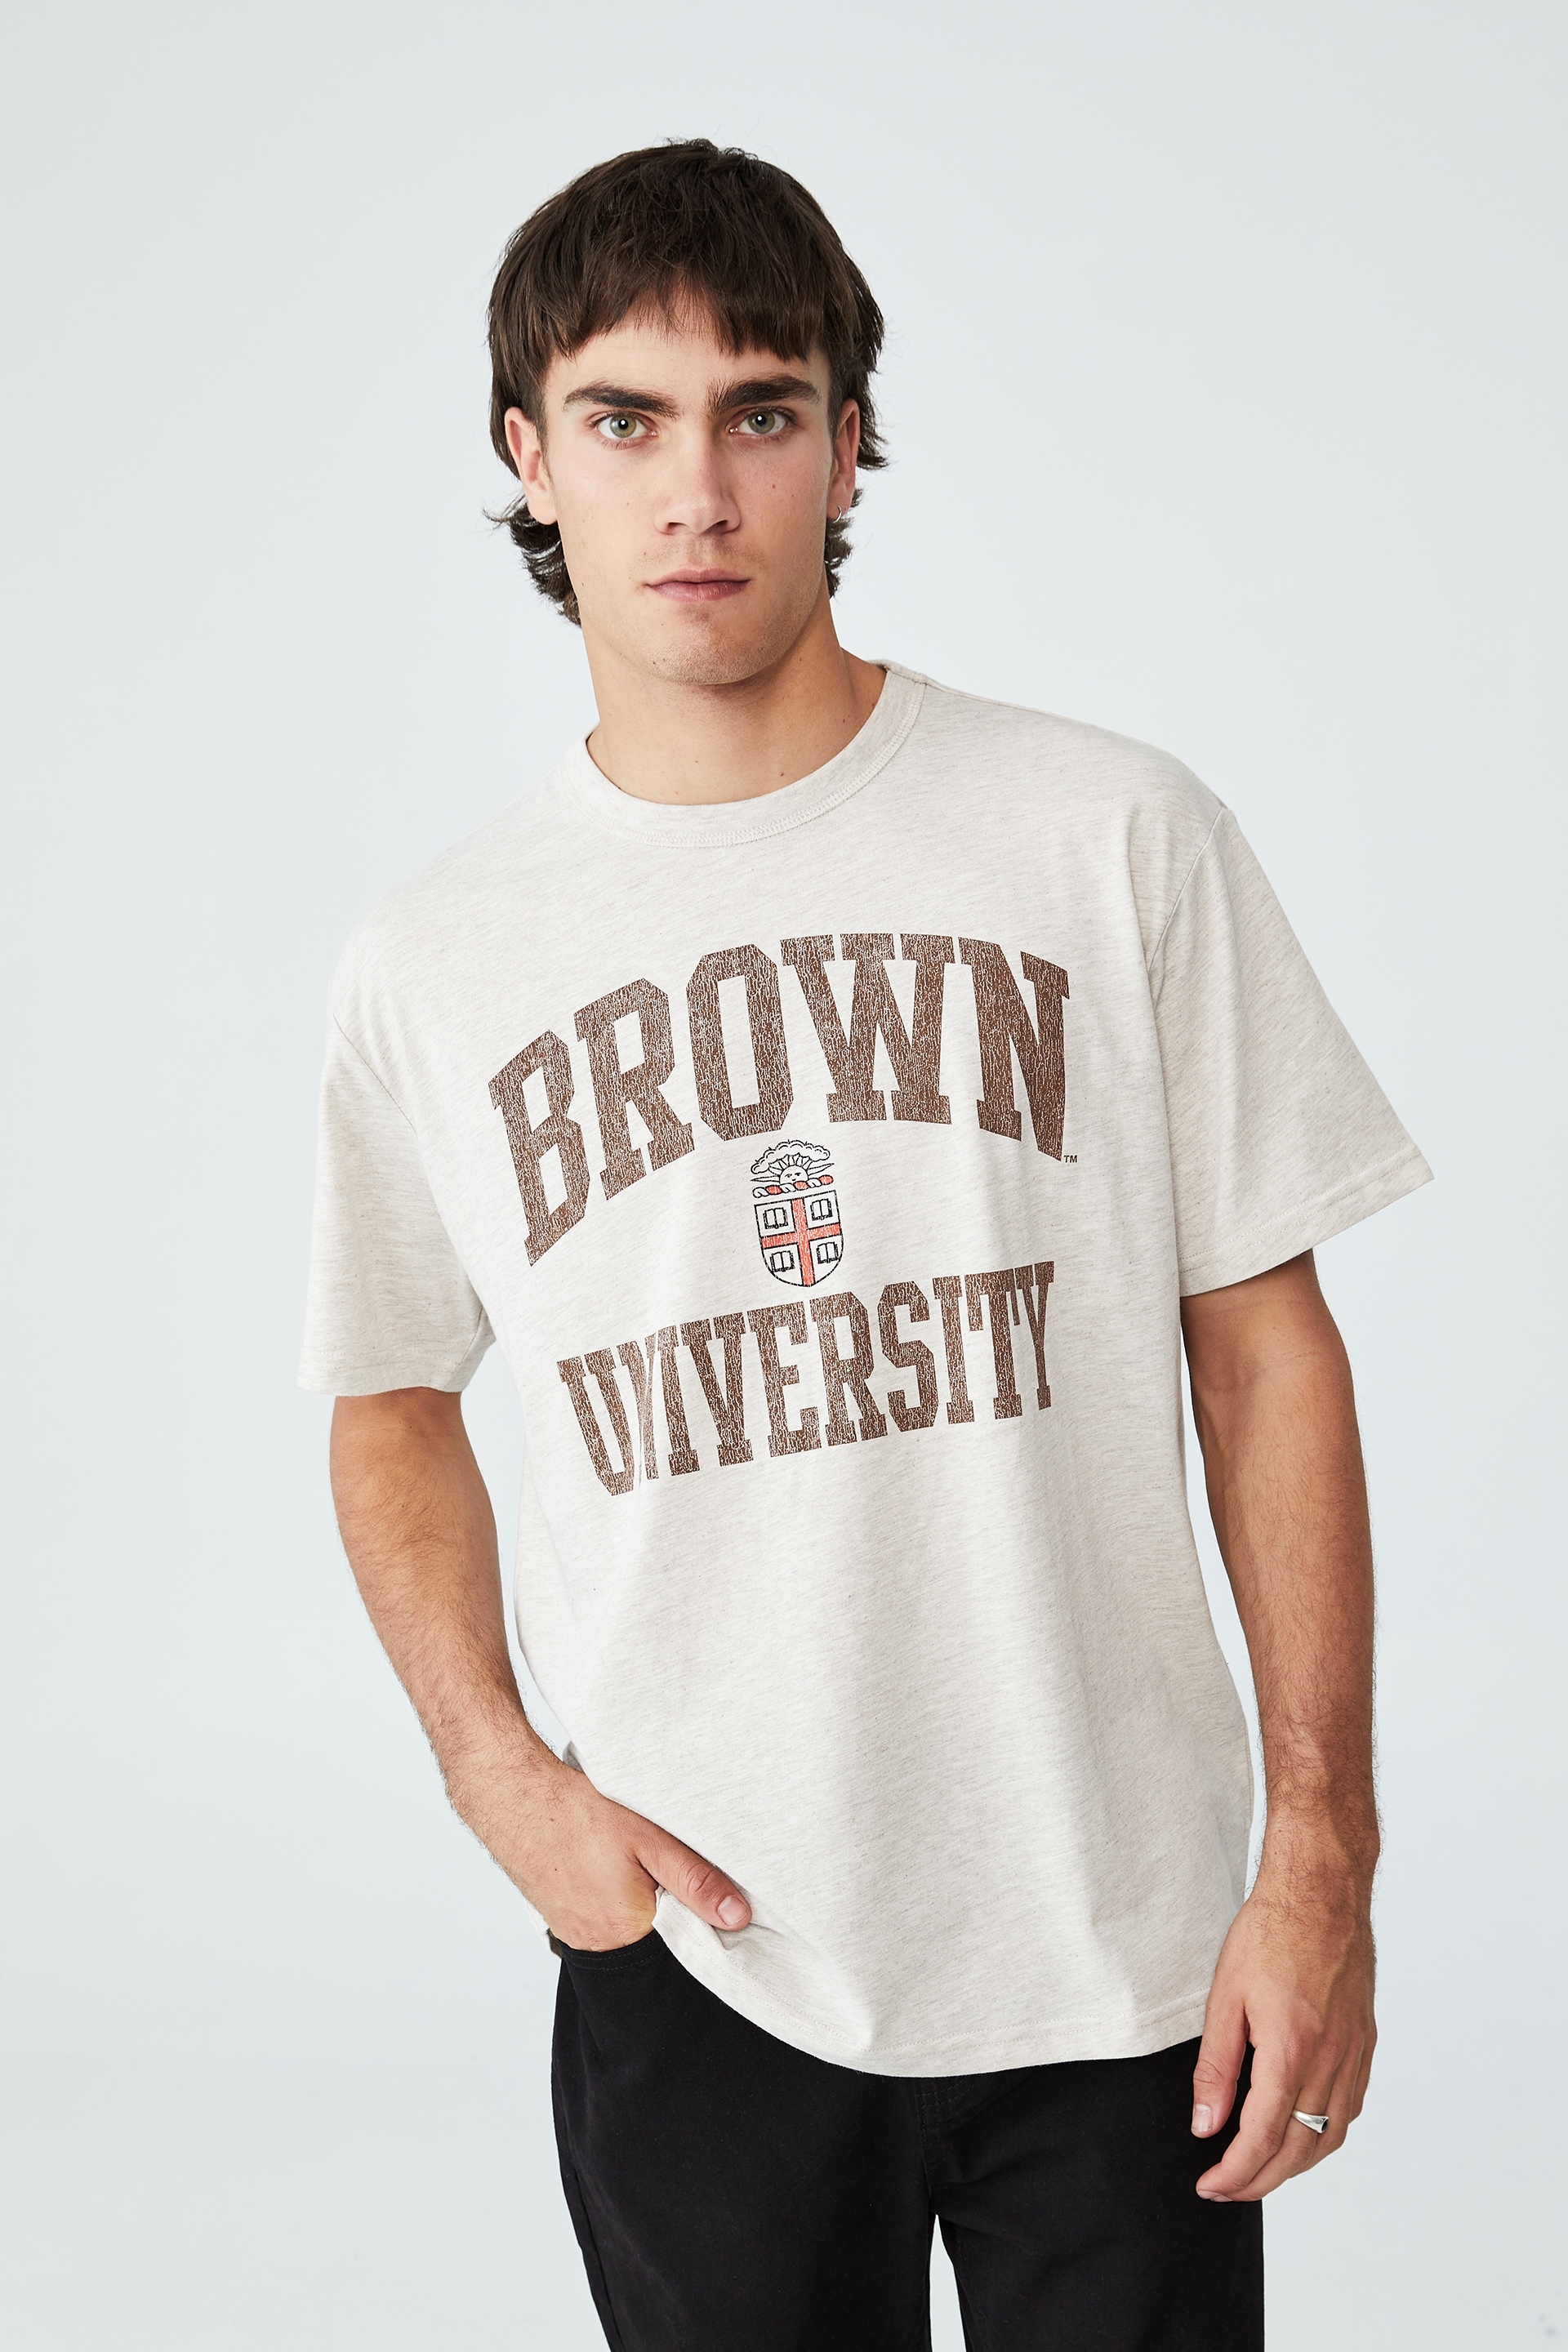 Cotton On Men - Special Edition T-Shirt - Lcn bro oatmeal marle/brown university